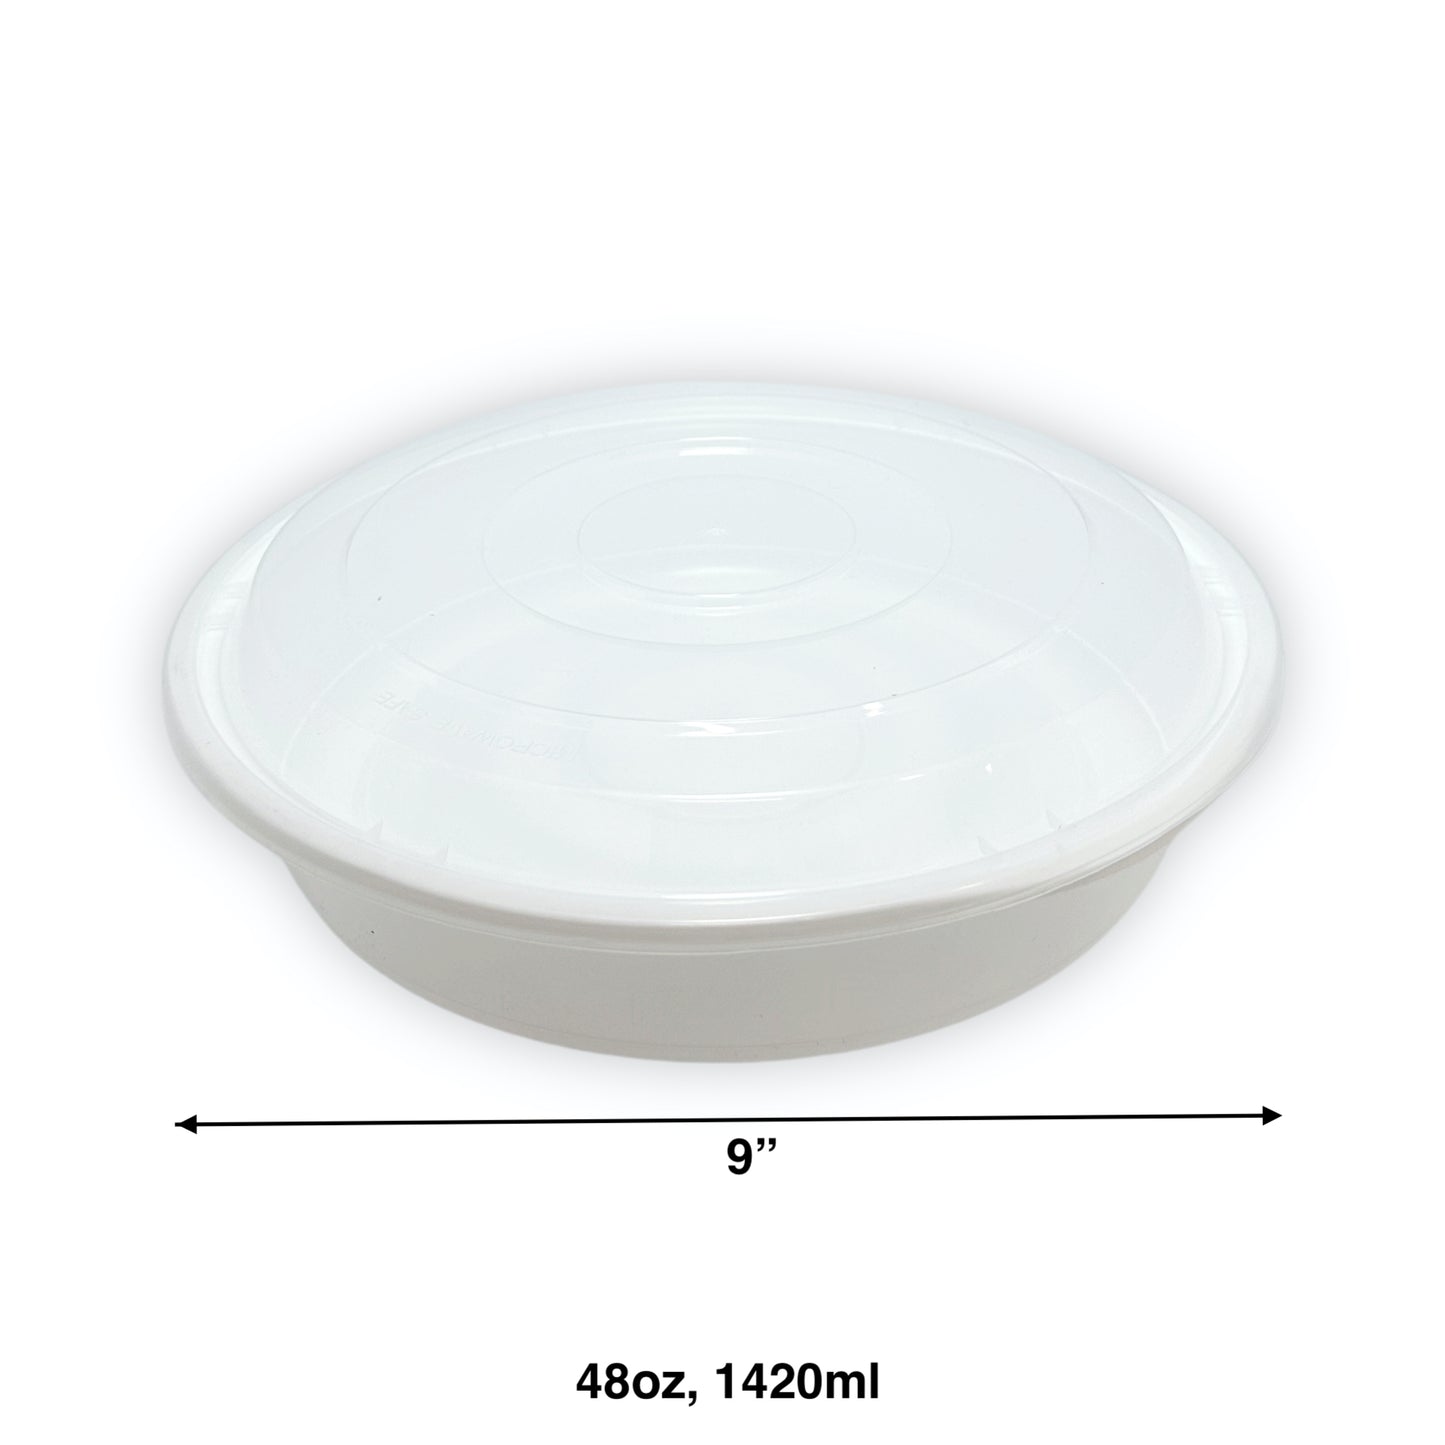 KIS-R48G | 150sets 48oz, 1420ml White PP Round 9" Container with Clear Lids Combo; $0.377/set